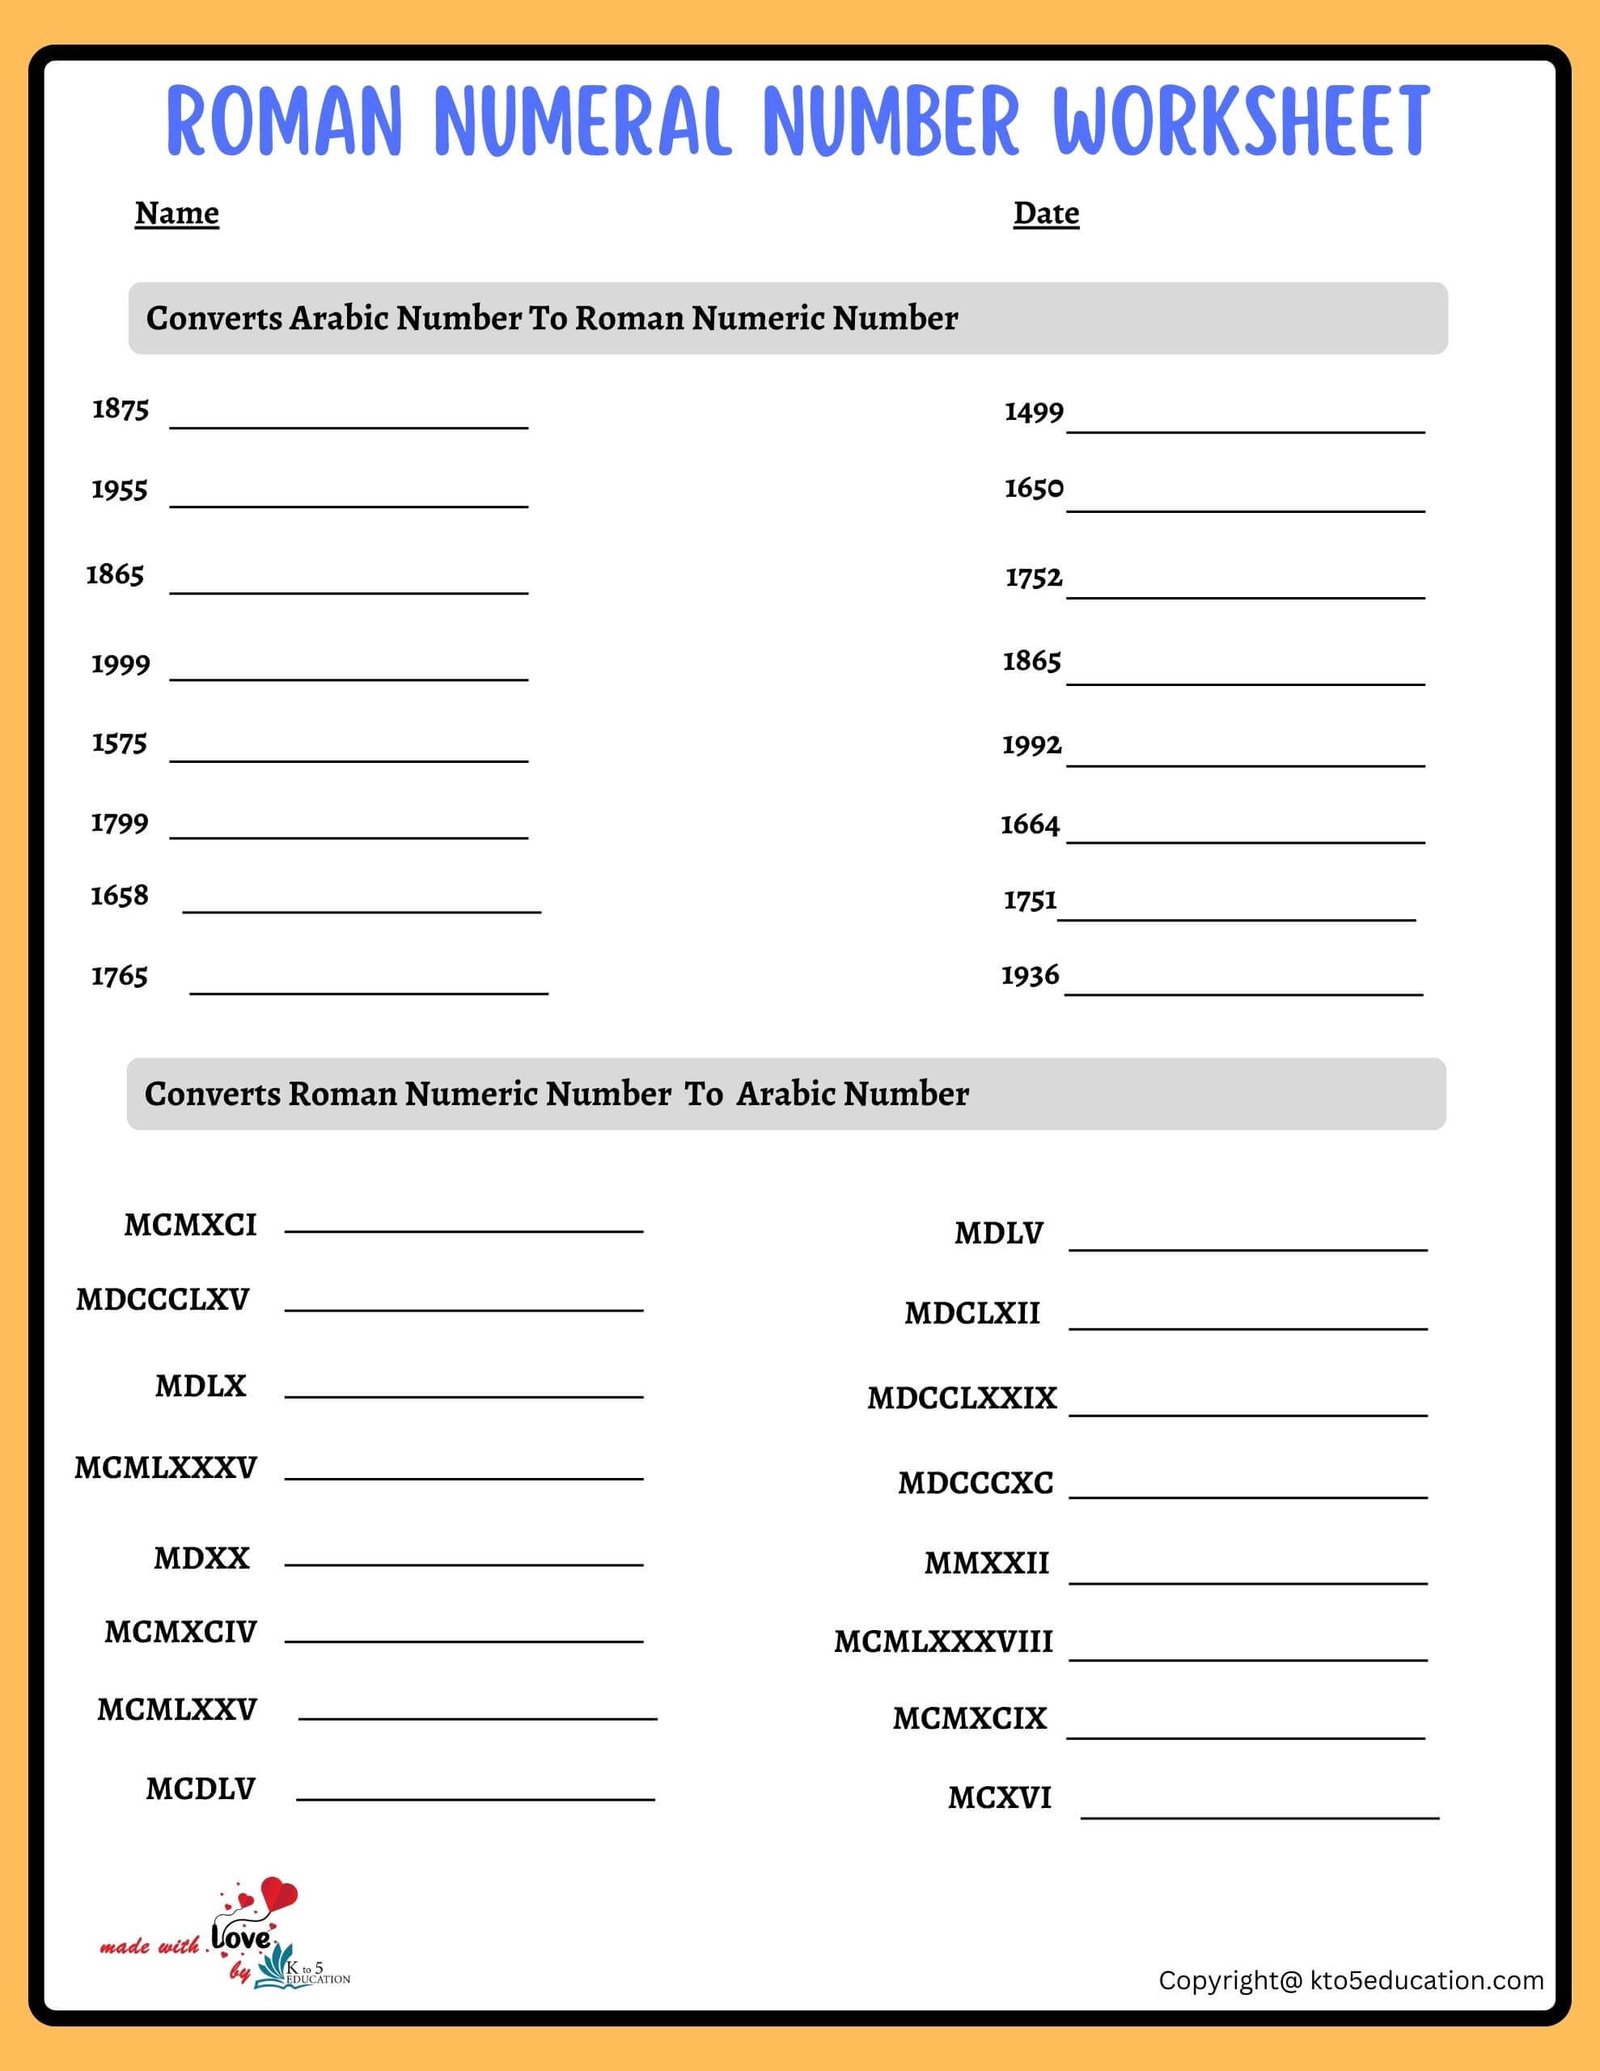 Roman Numeral Year Worksheets For Grade 3